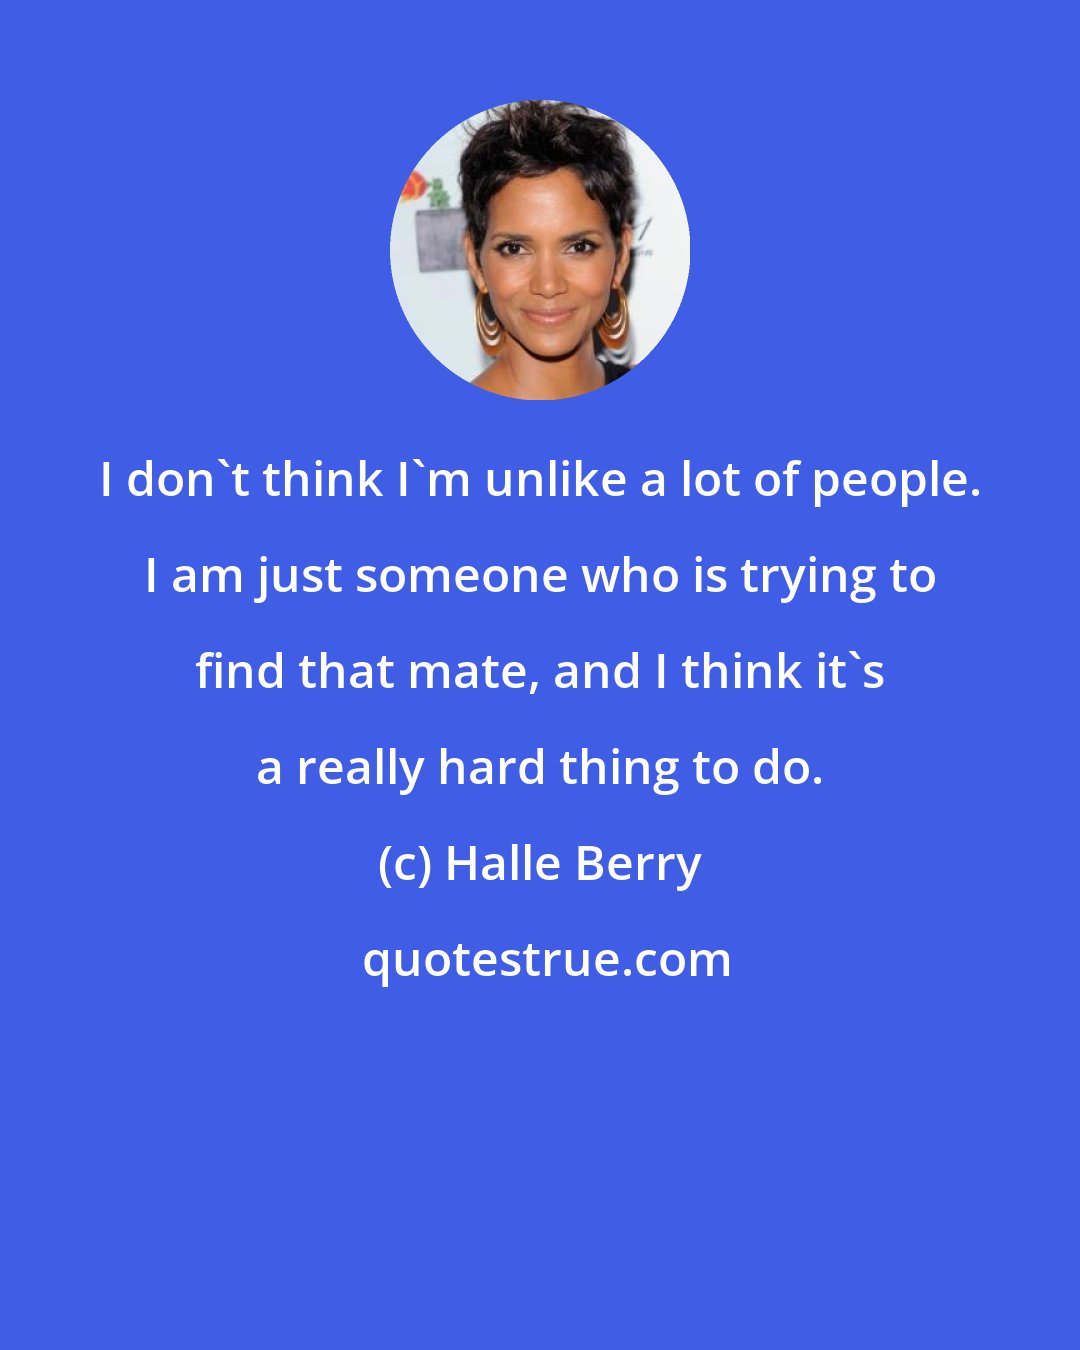 Halle Berry: I don't think I'm unlike a lot of people. I am just someone who is trying to find that mate, and I think it's a really hard thing to do.